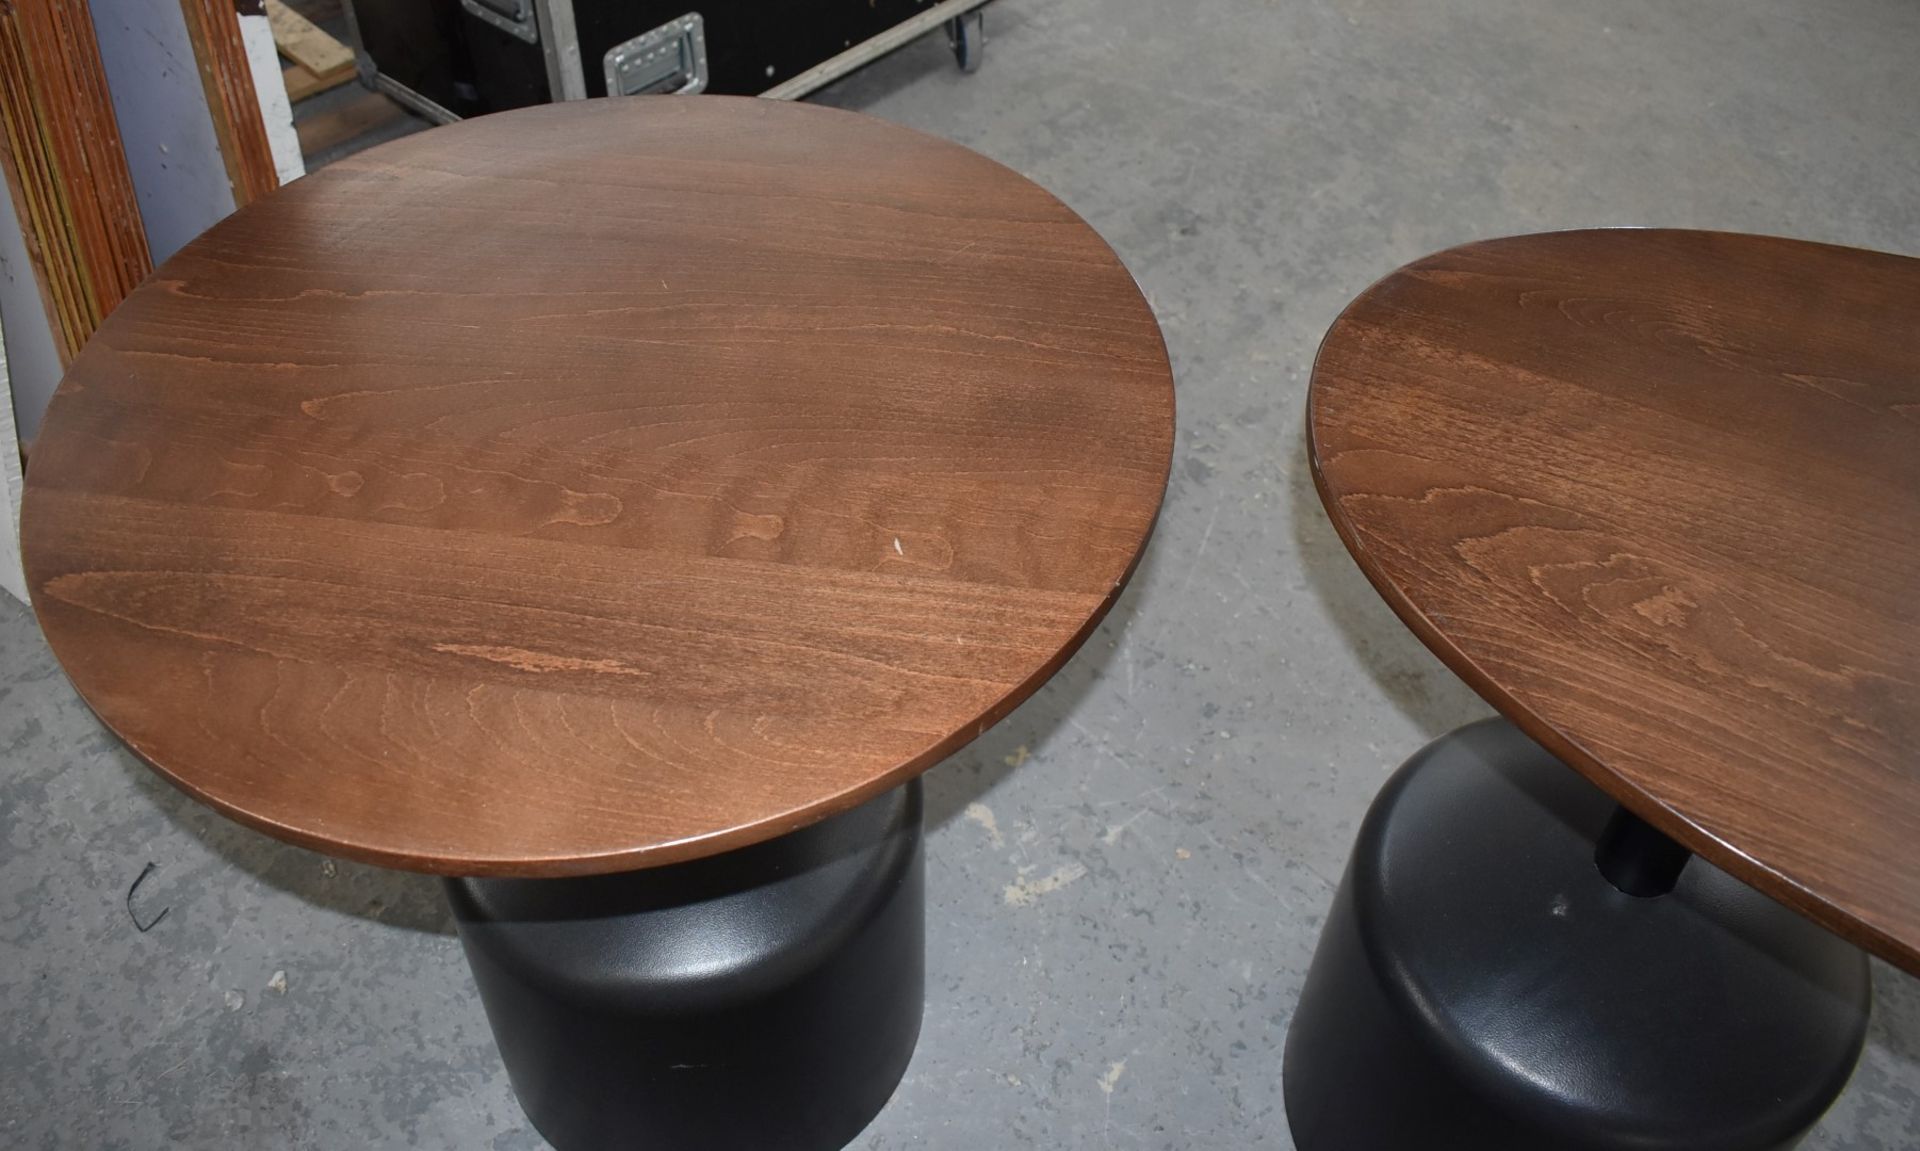 14 x Commercial Restaurant Tables Features Large Black Pedestals and Dark Stained Wooden Tops - Image 8 of 23